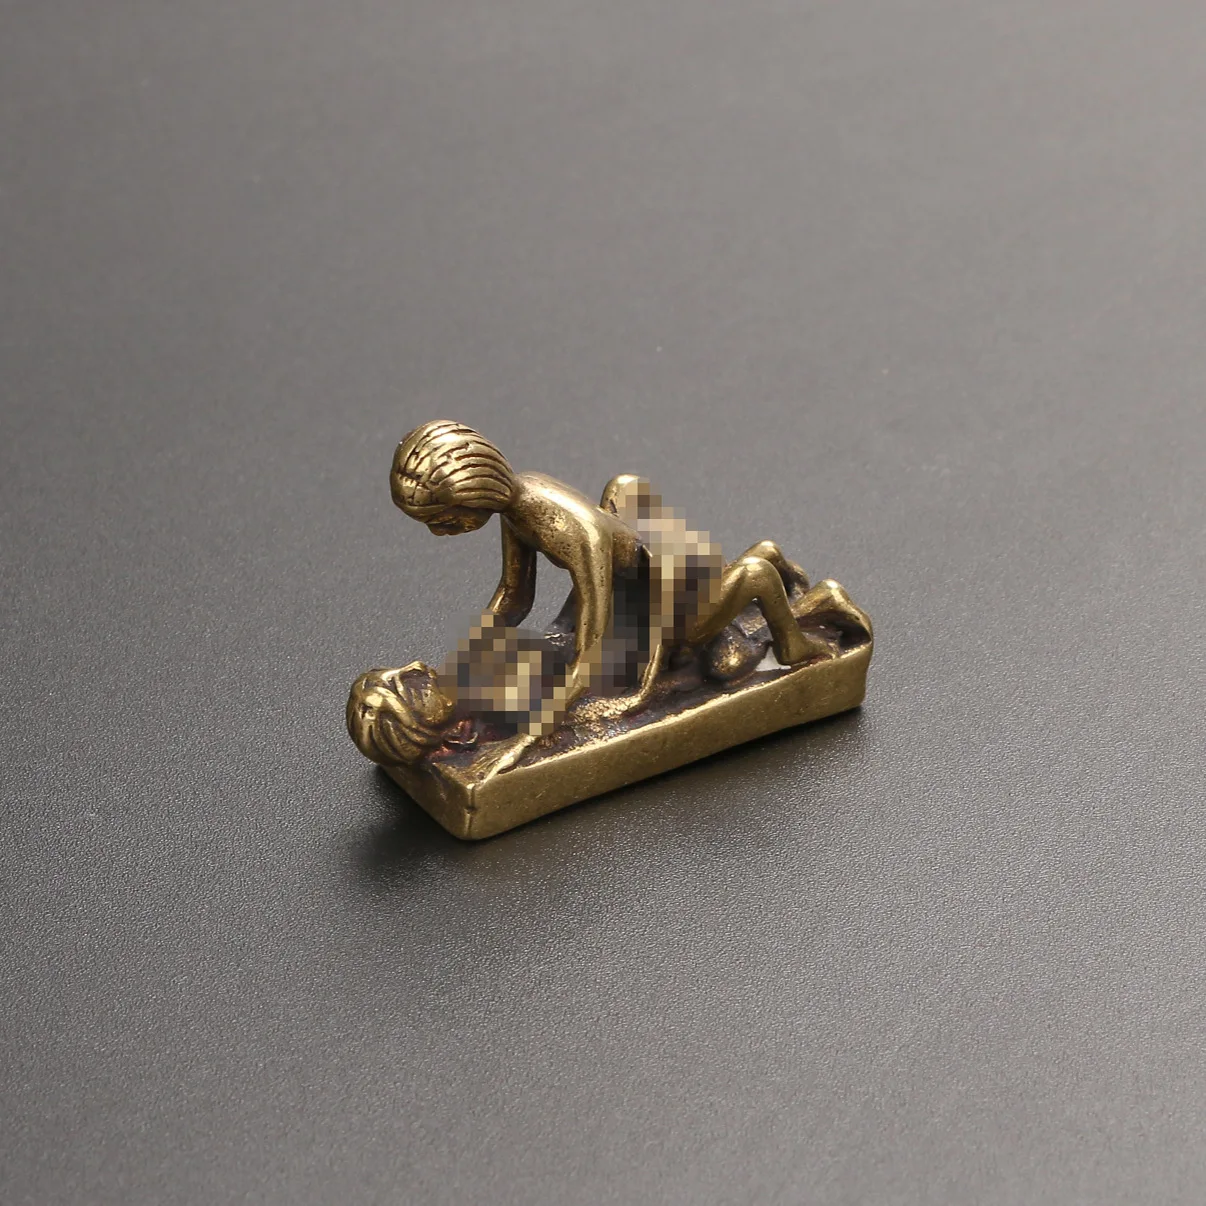 Brass Material Erotic Statue Adult Toy Small Decorative Keychaincopper Crafts Buy Sex Statue